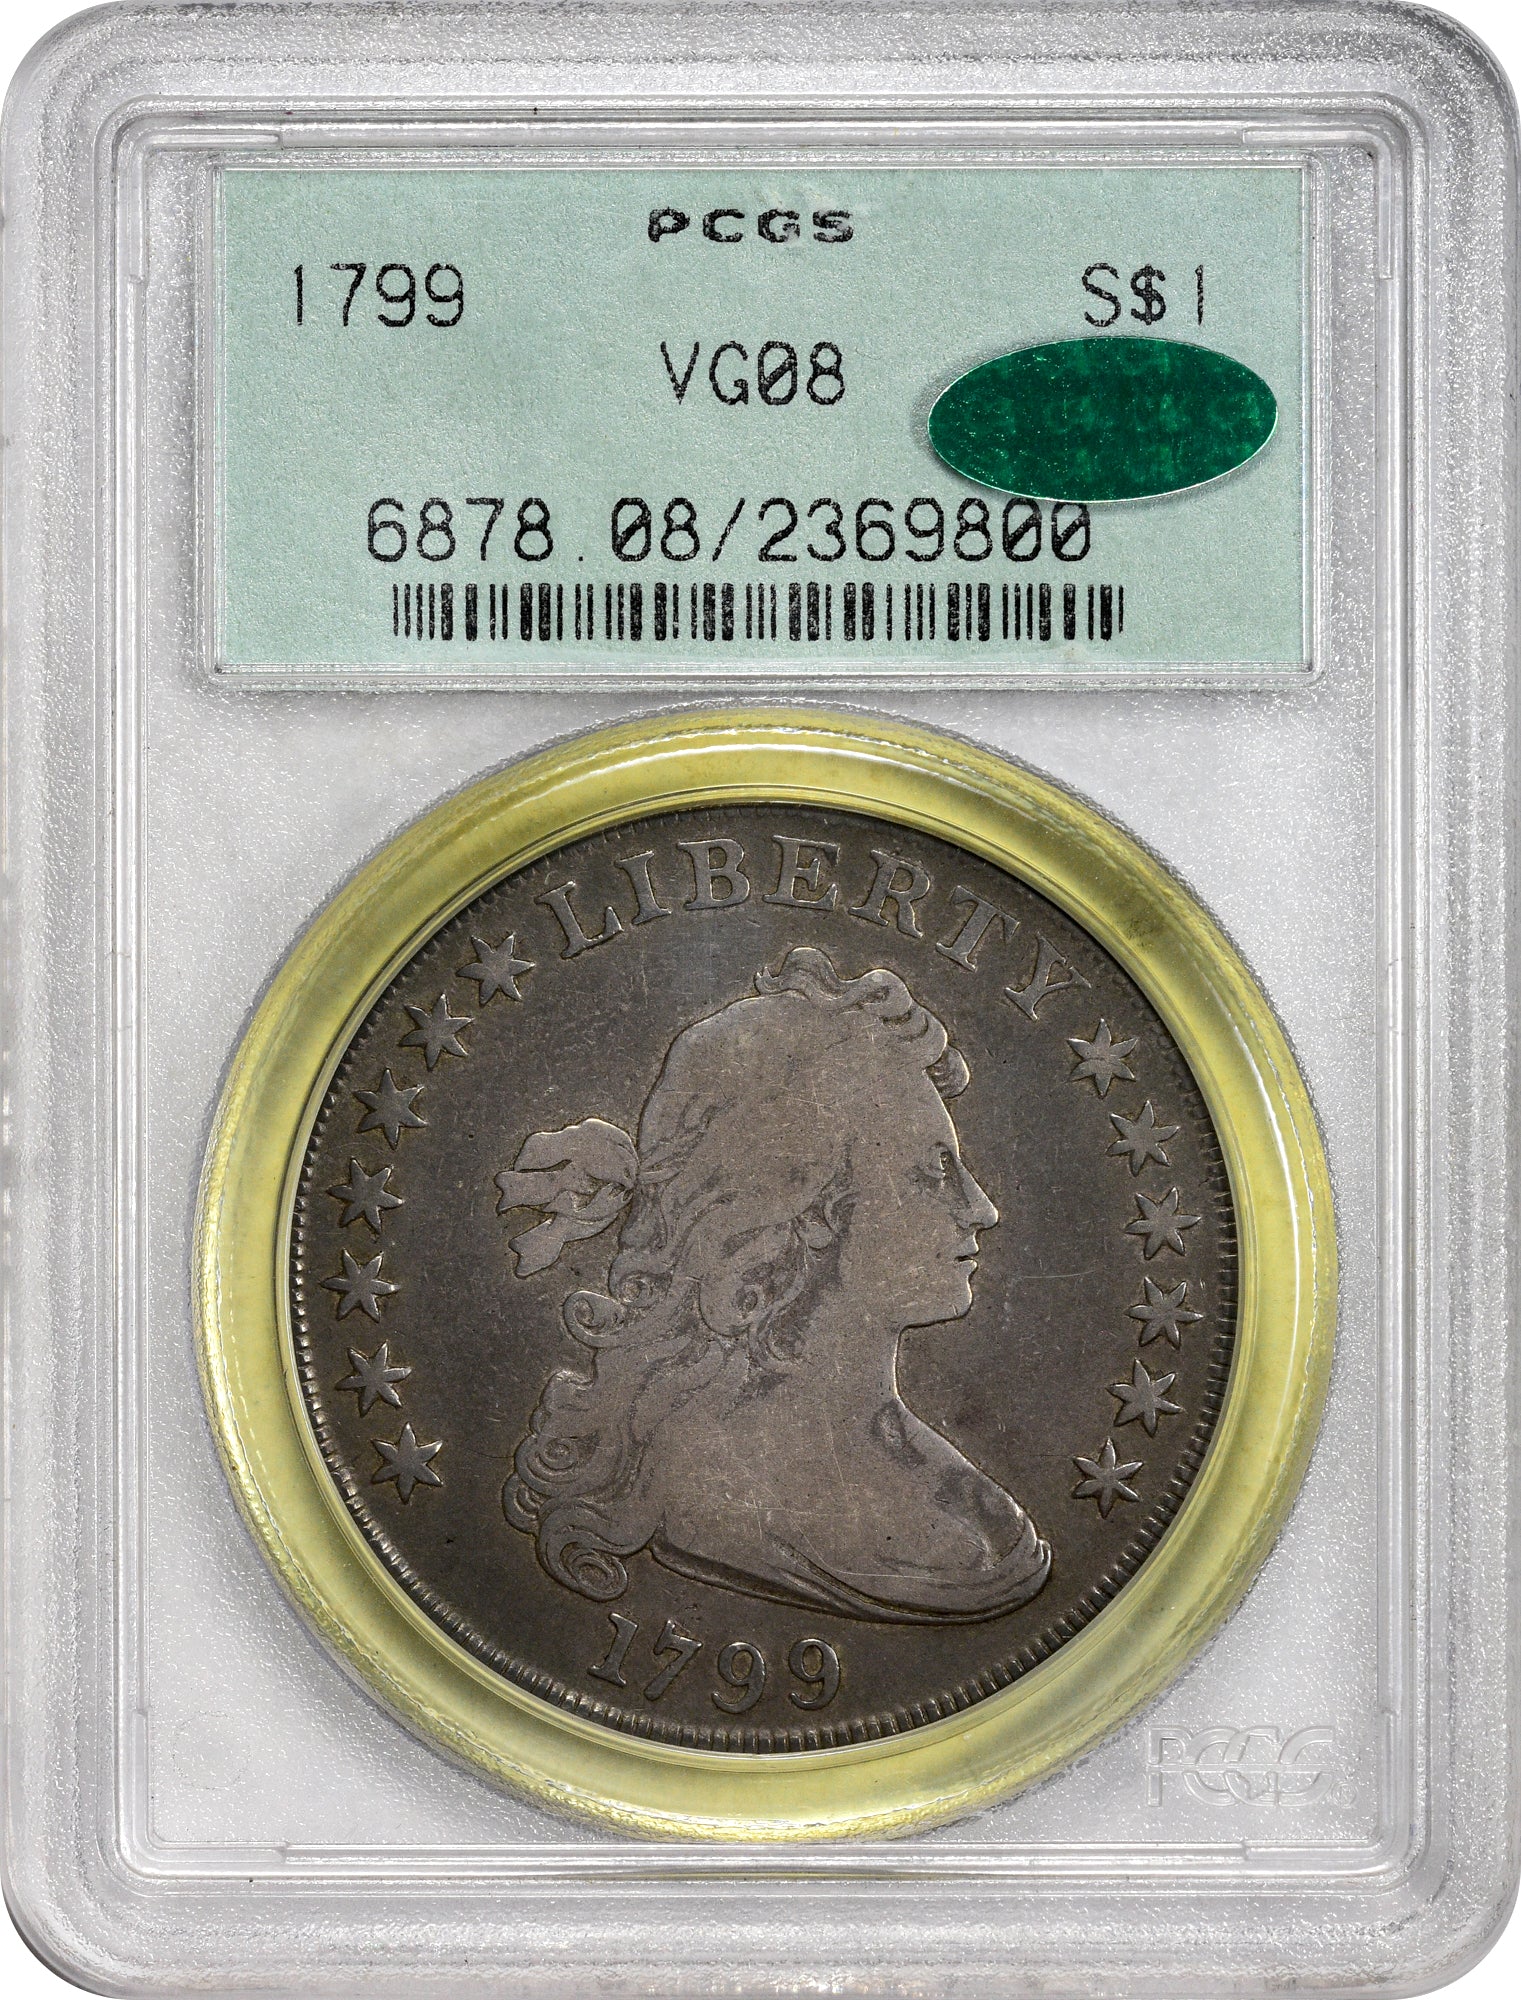 1799 $1 VG08 OGH PCGS CAC - Paradime Coins | PCGS NGC CACG CAC Rare US Numismatic Coins For Sale